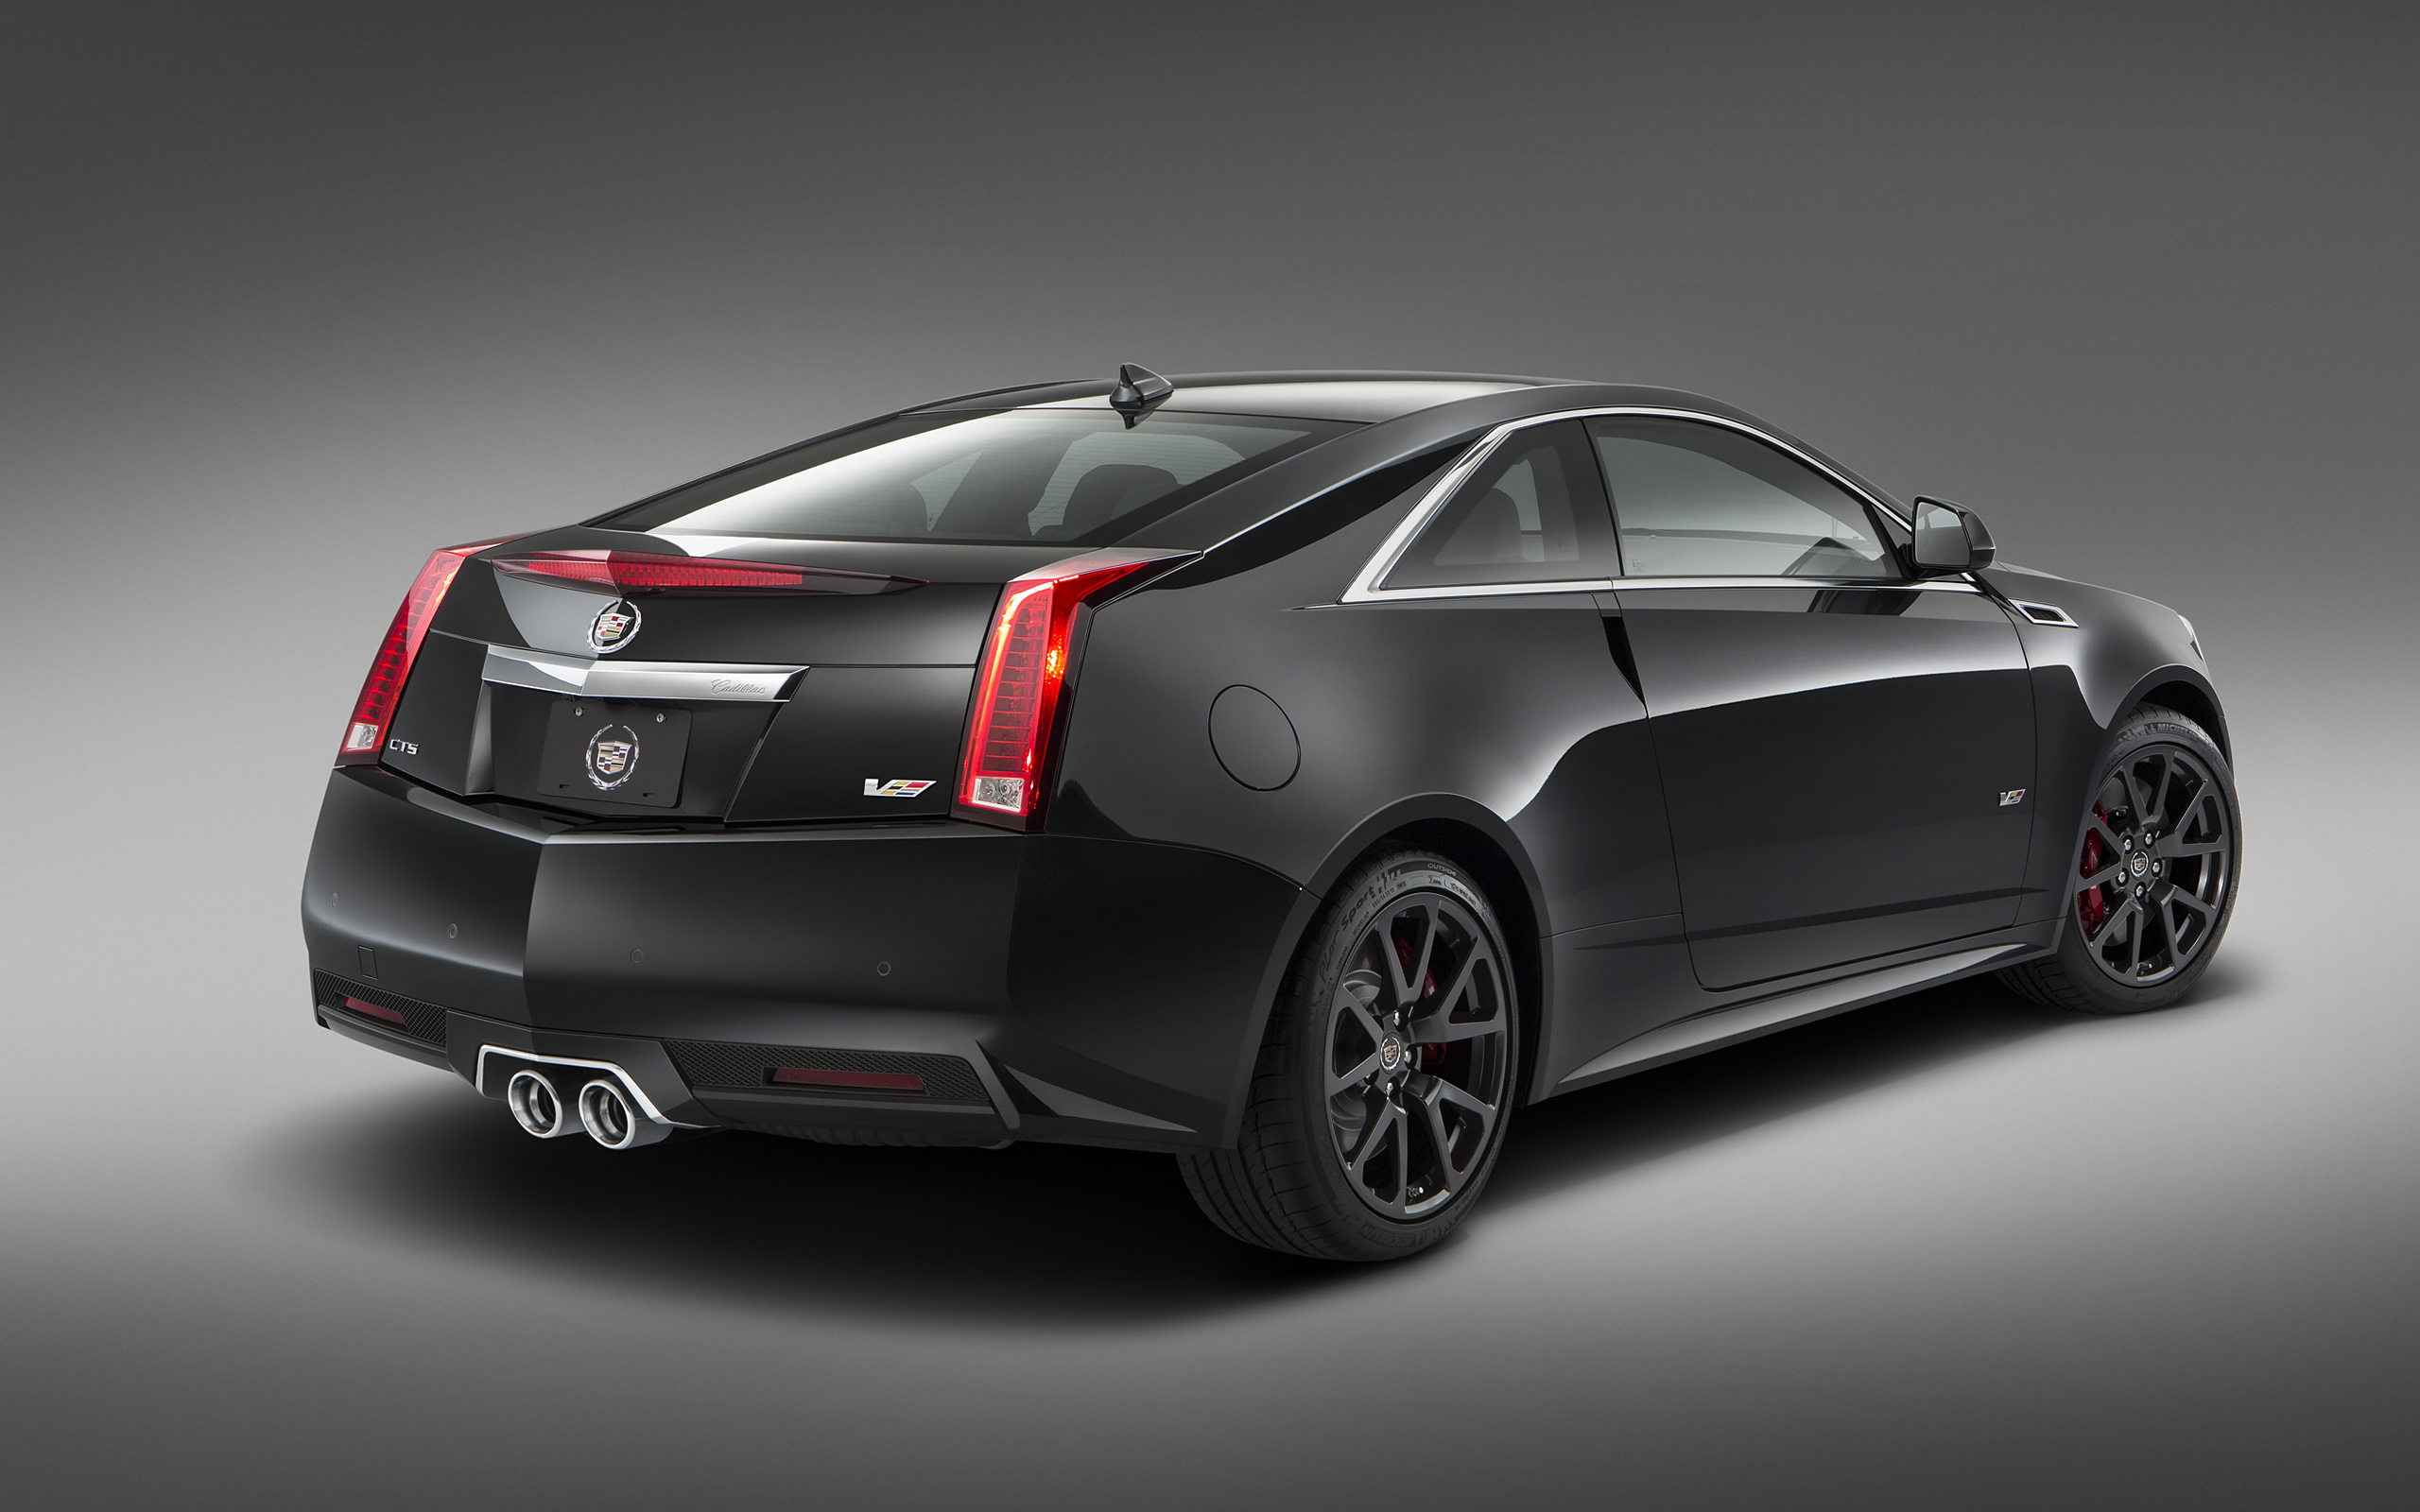 Black Car Cadillac Cts V Coupe Car Coupe Luxury Car Mid Size Car 2560x1600